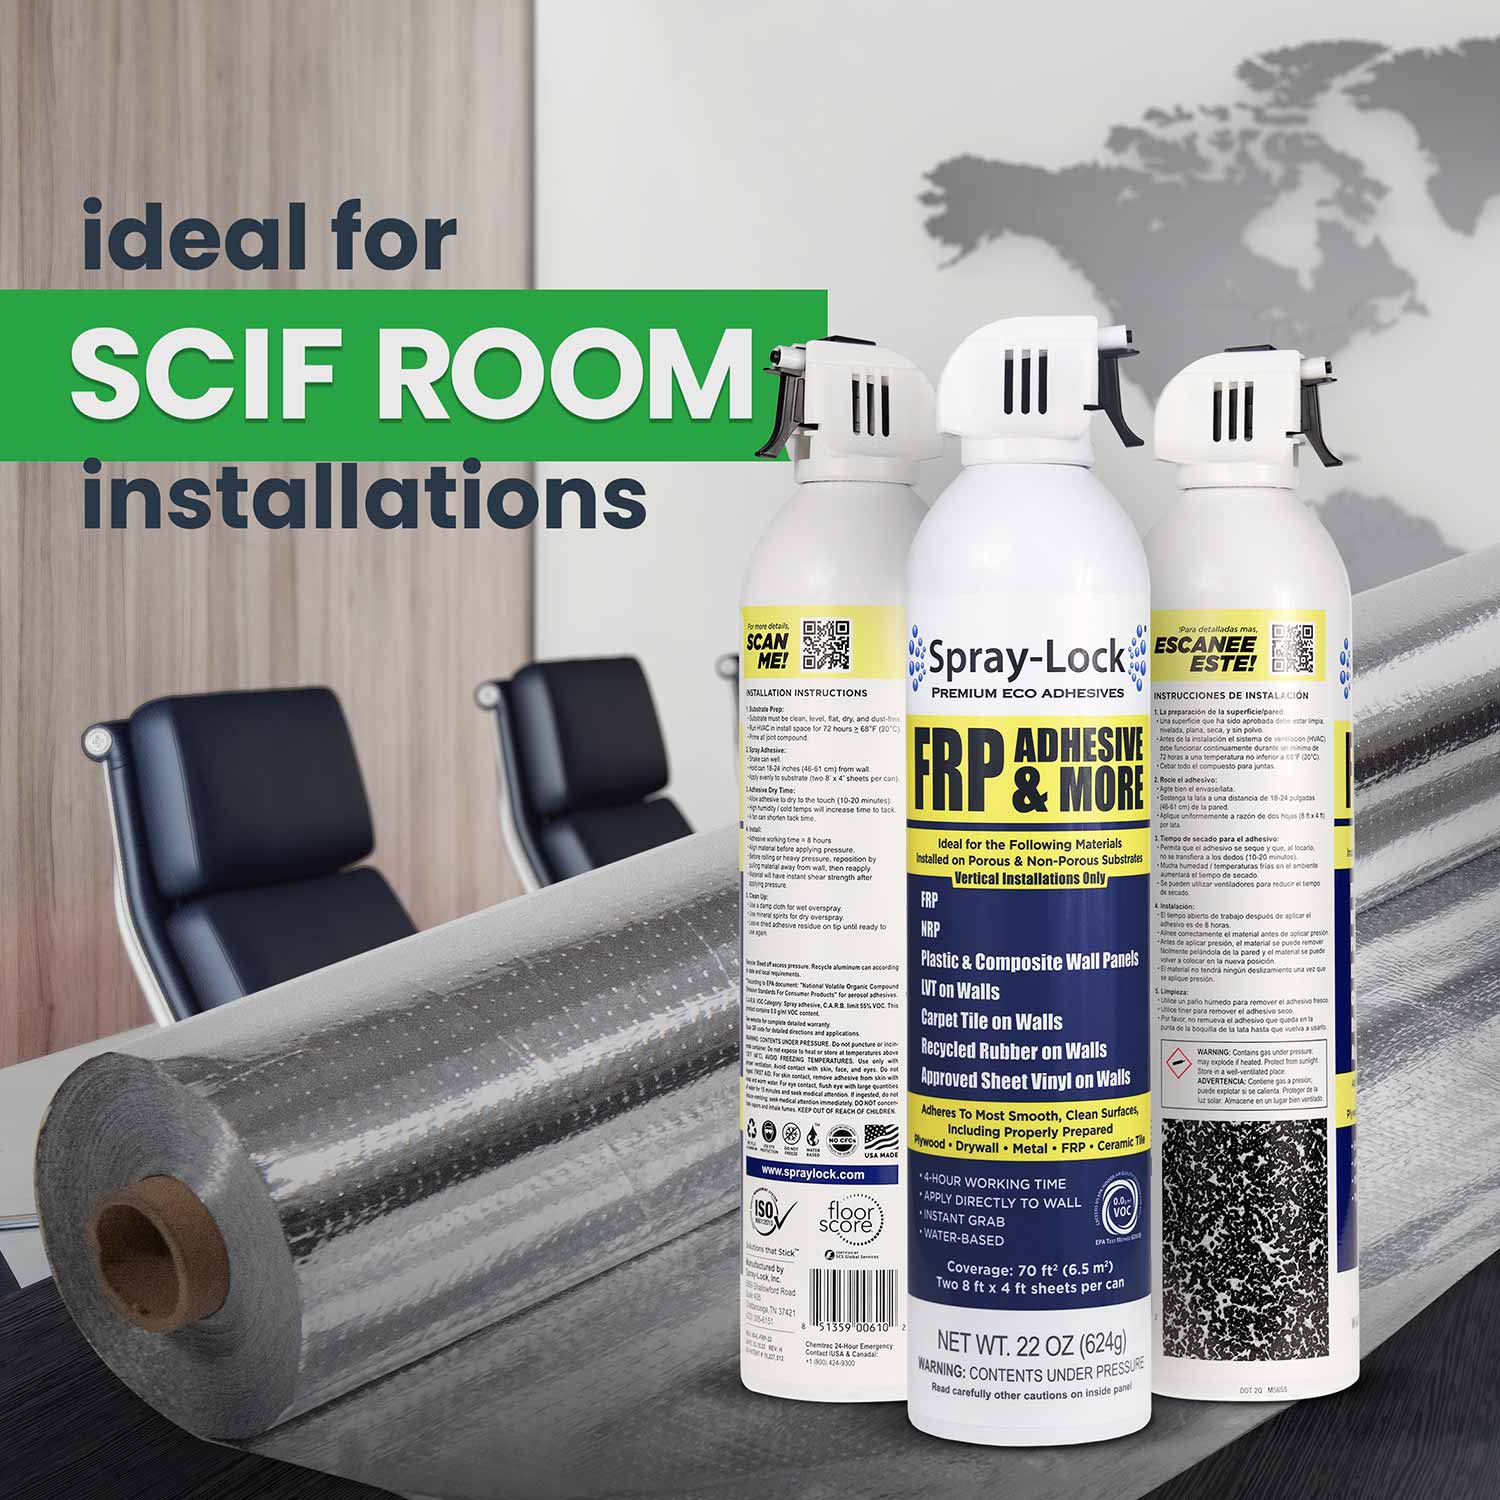 Spray adhesive that is ideal for SCIF room installations